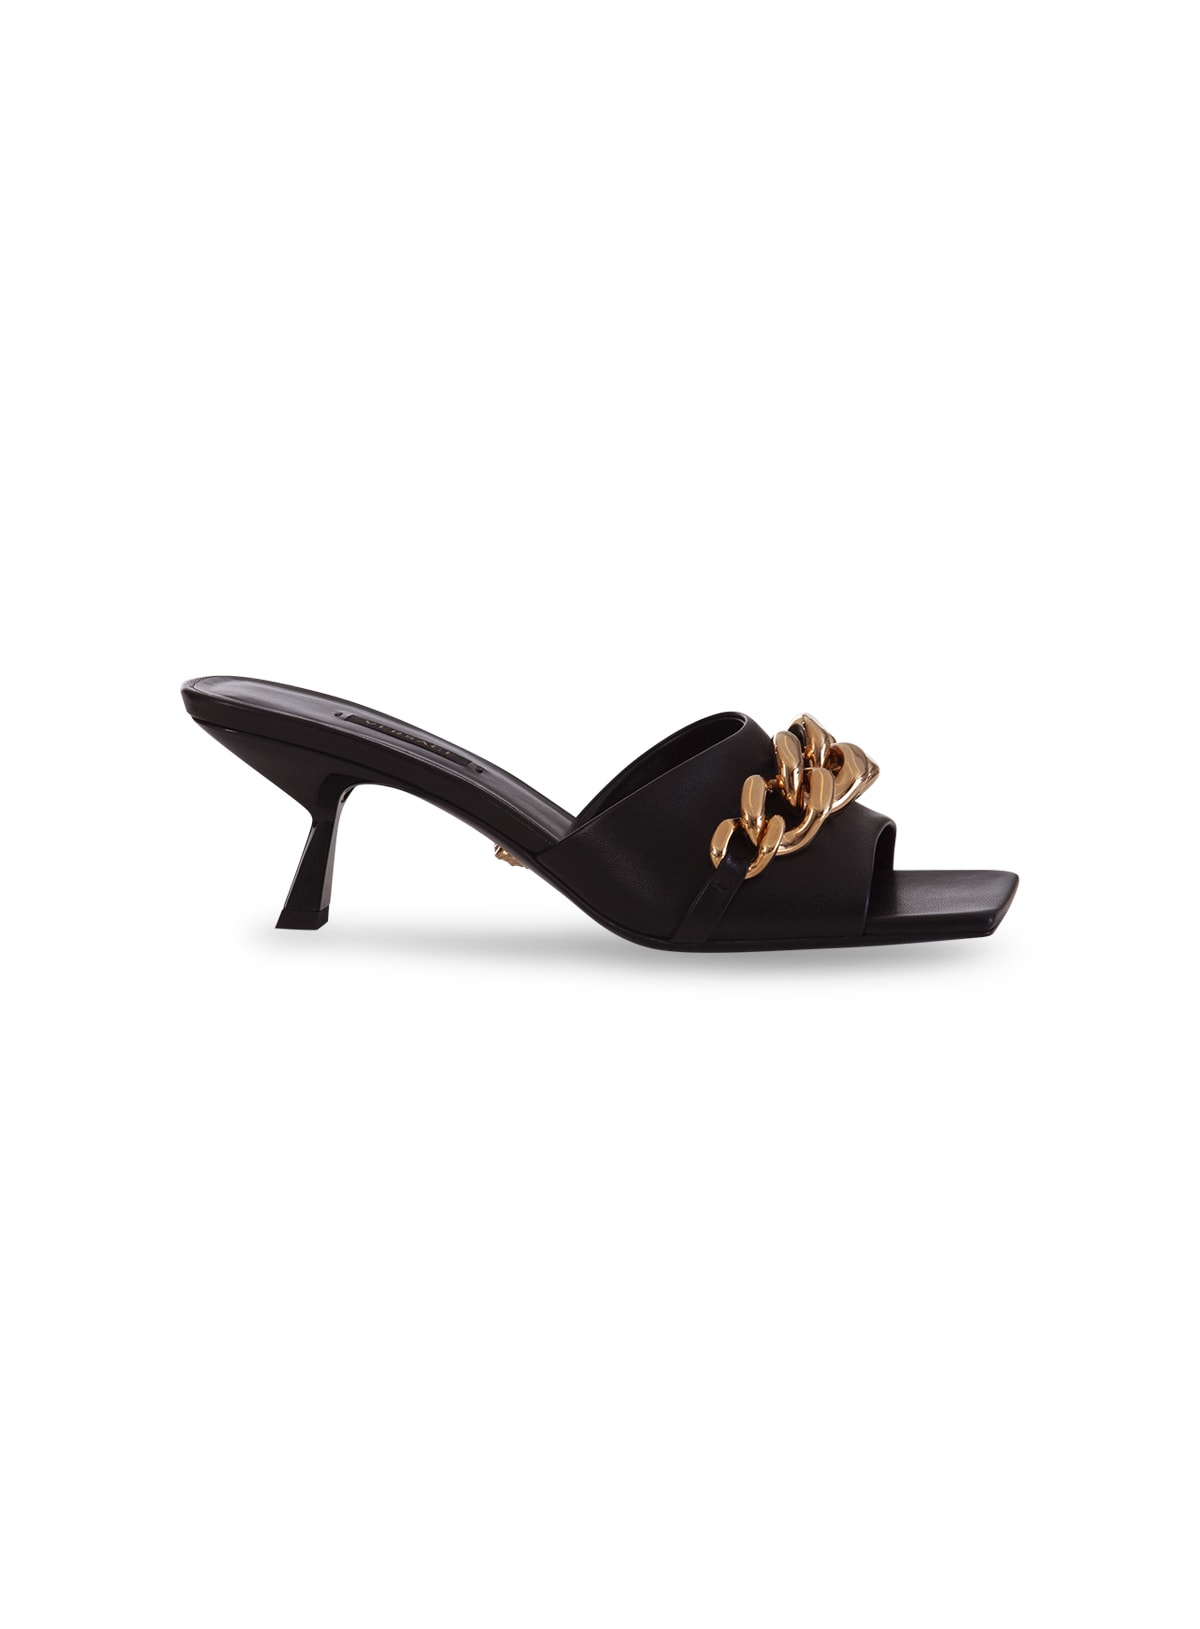 Buy Versace Medusa Chain Mules online, shop Versace shoes with free shipping